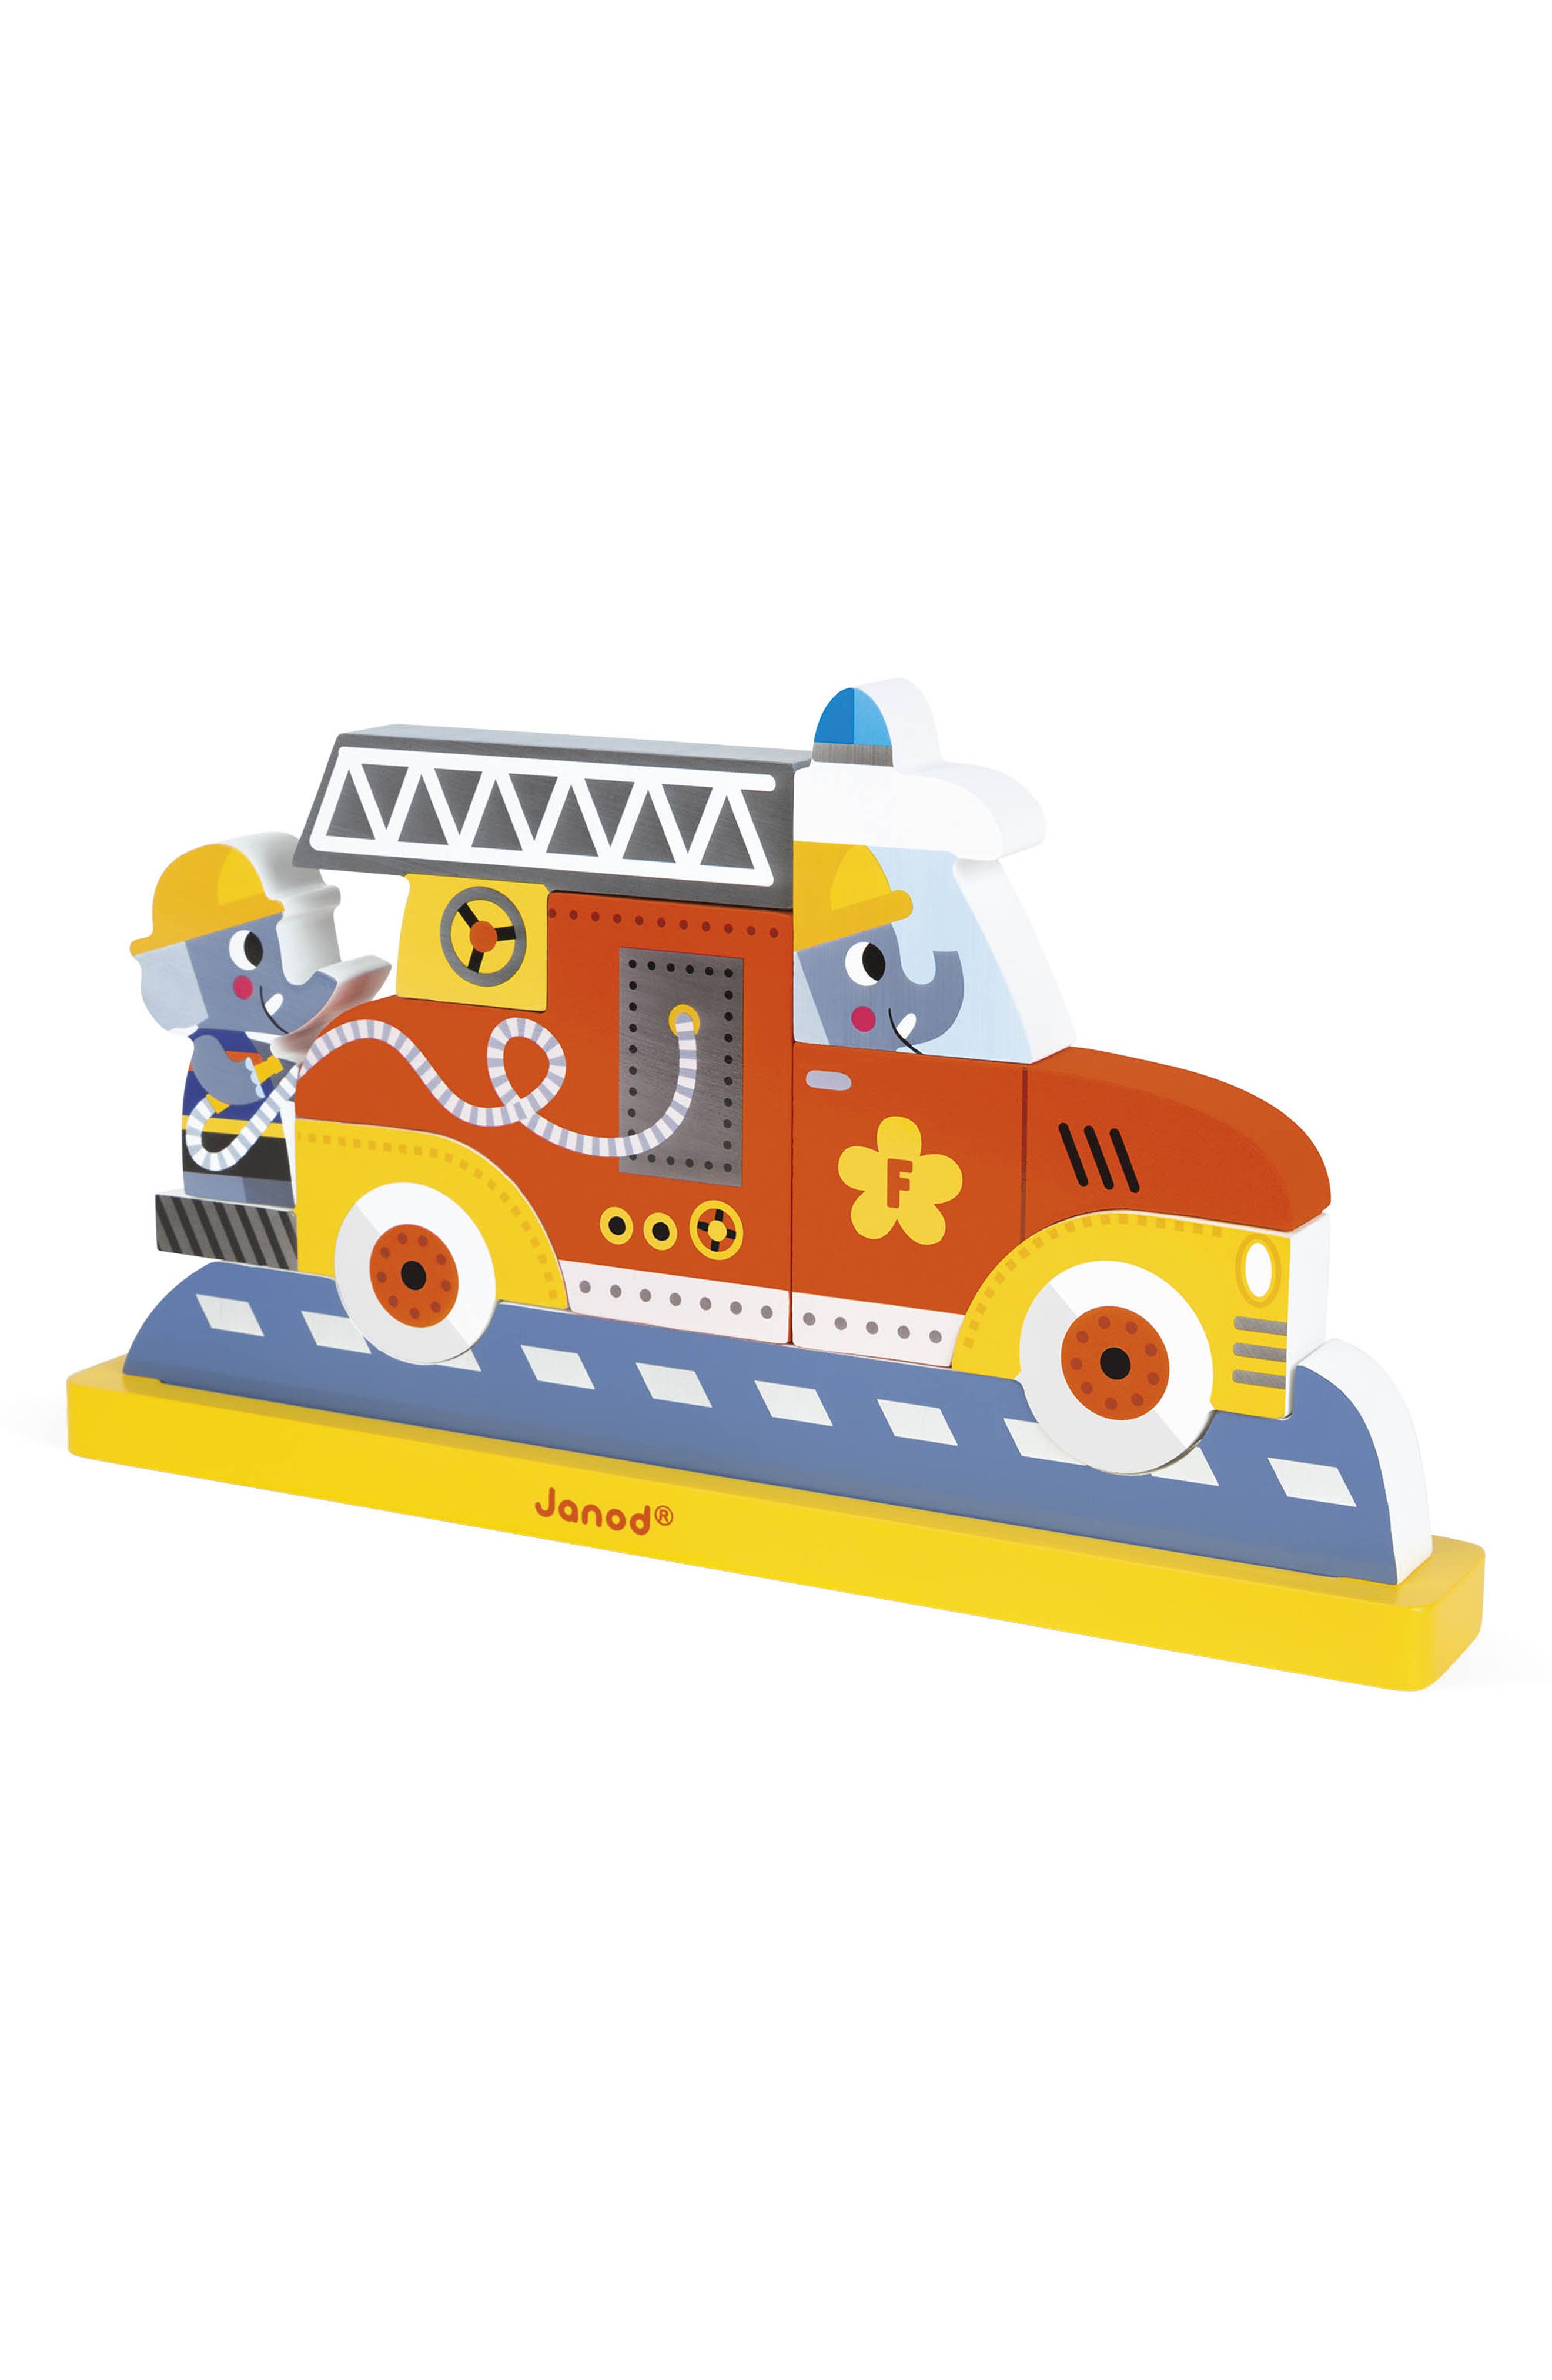 EAN 3700217380274 product image for Janod Firemen Magnetic Vertical Puzzle | upcitemdb.com